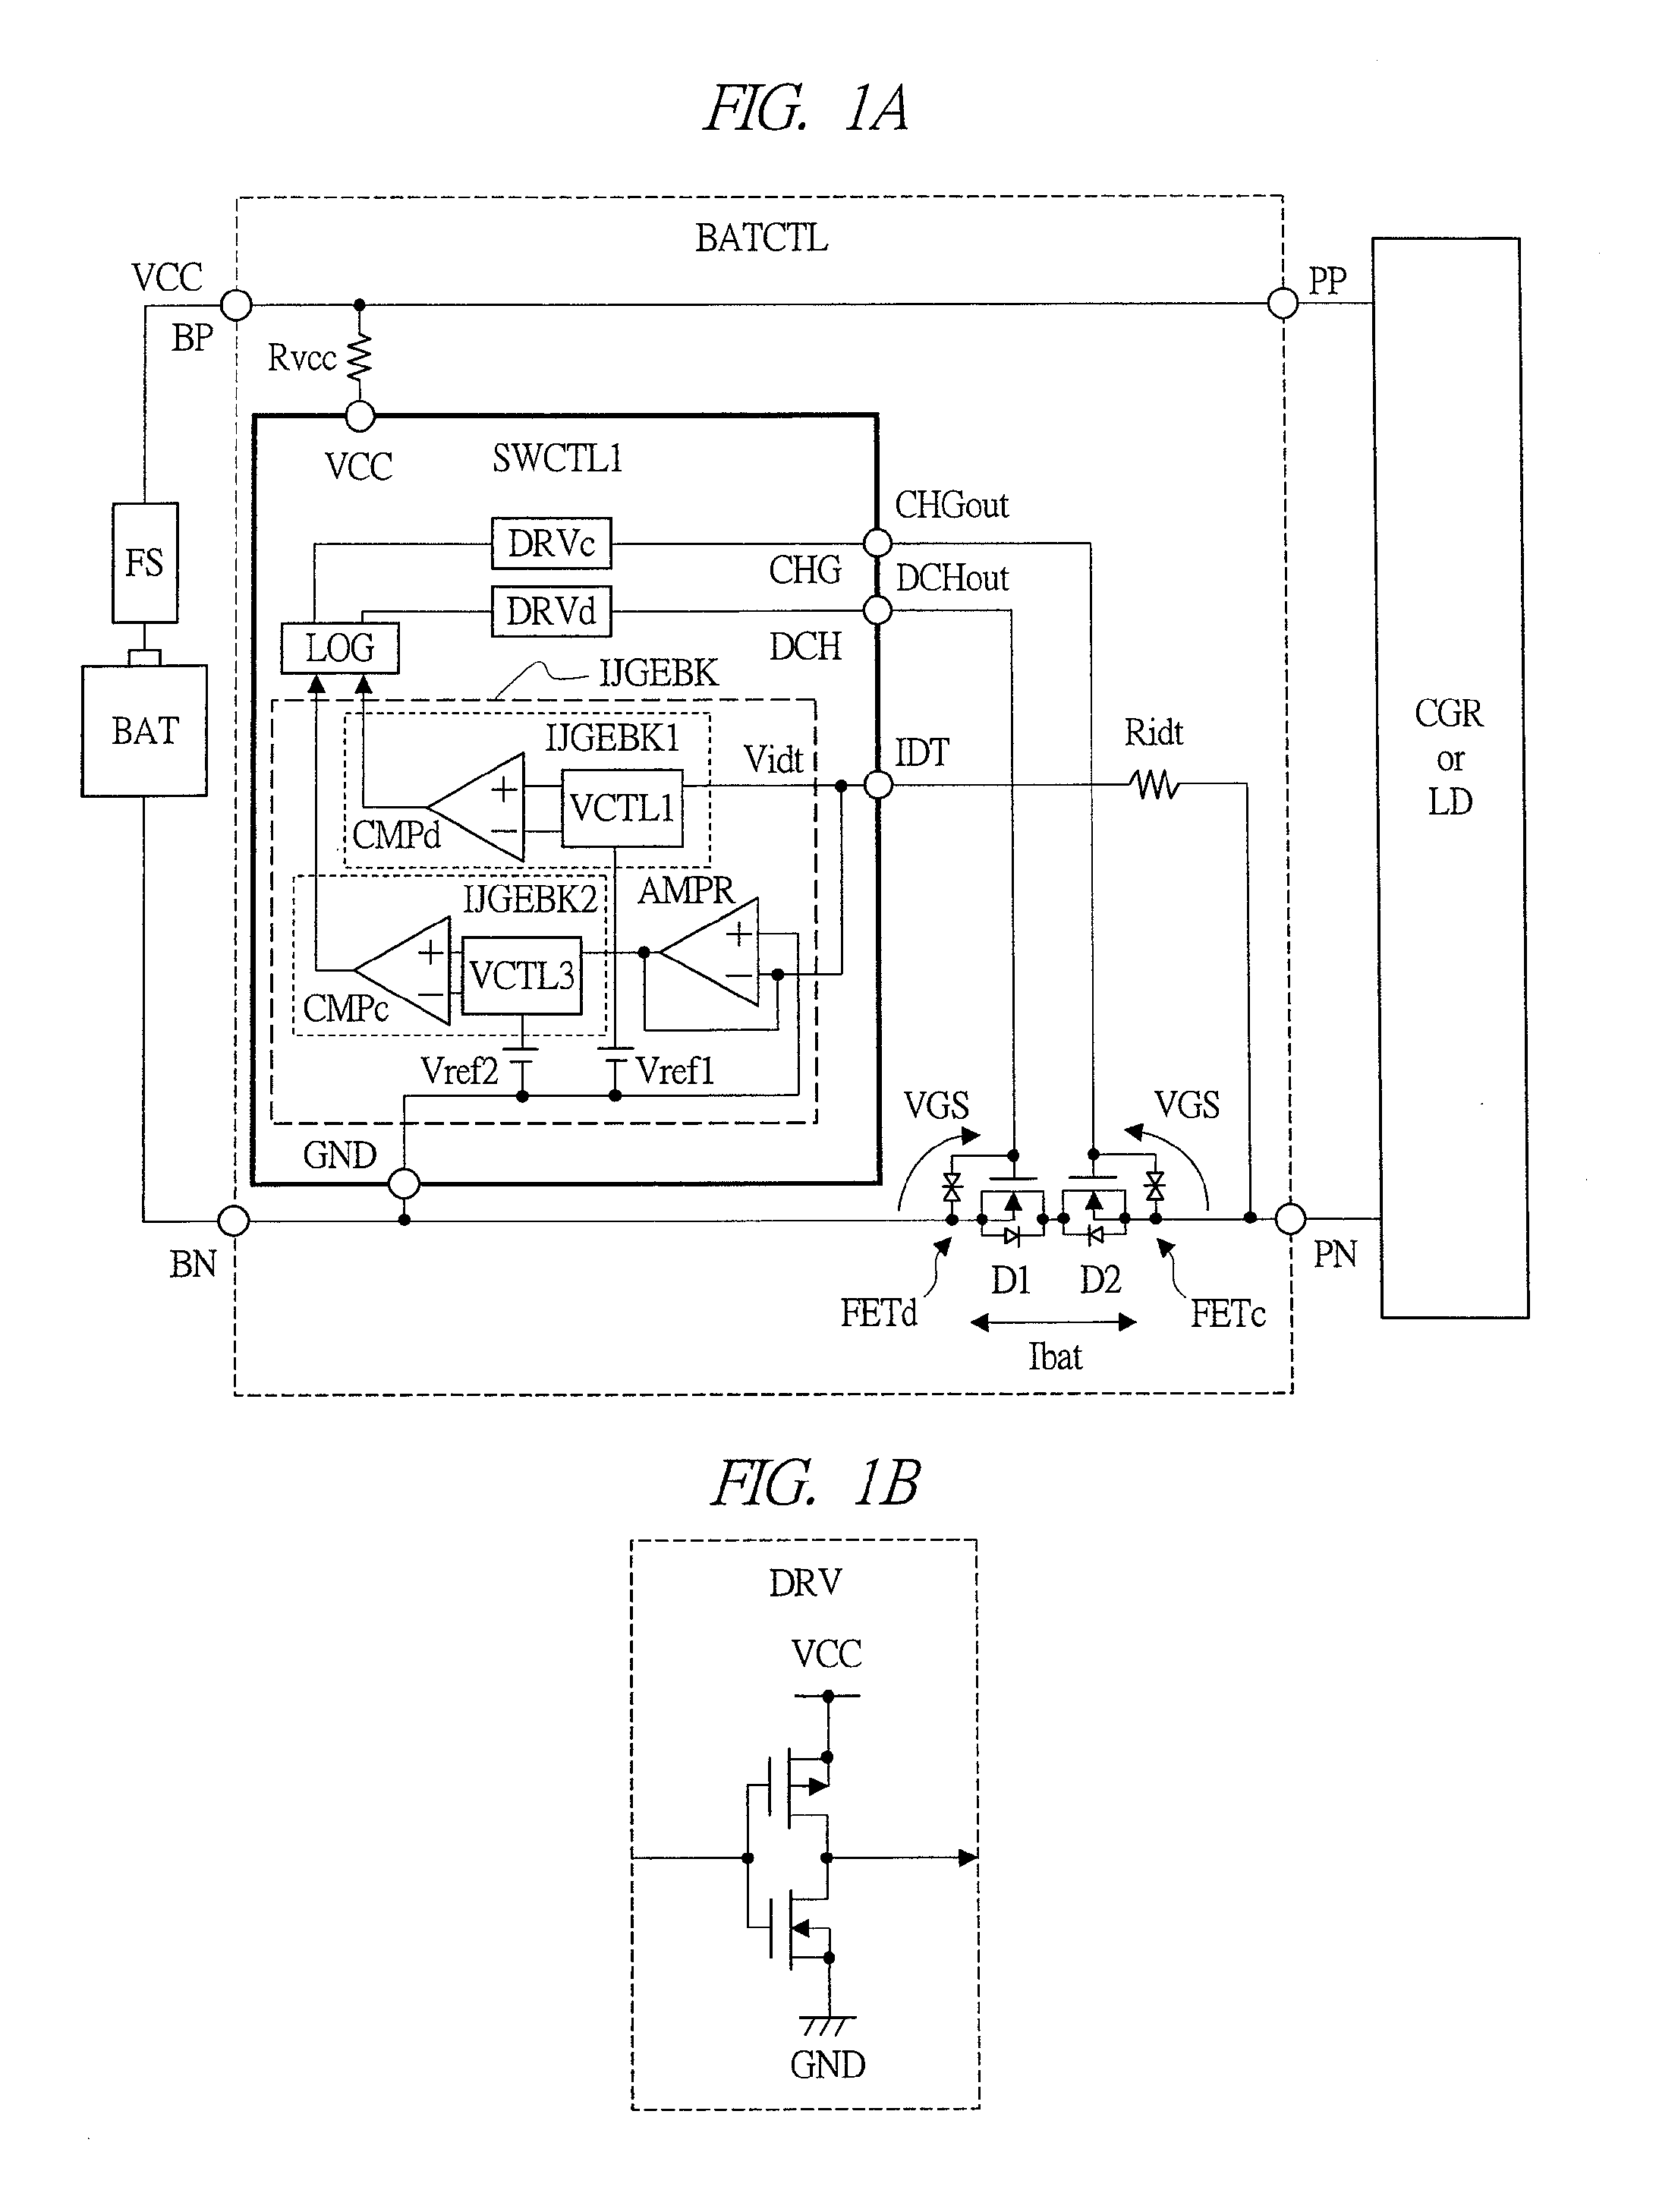 Secondary-battery monitoring device and battery pack